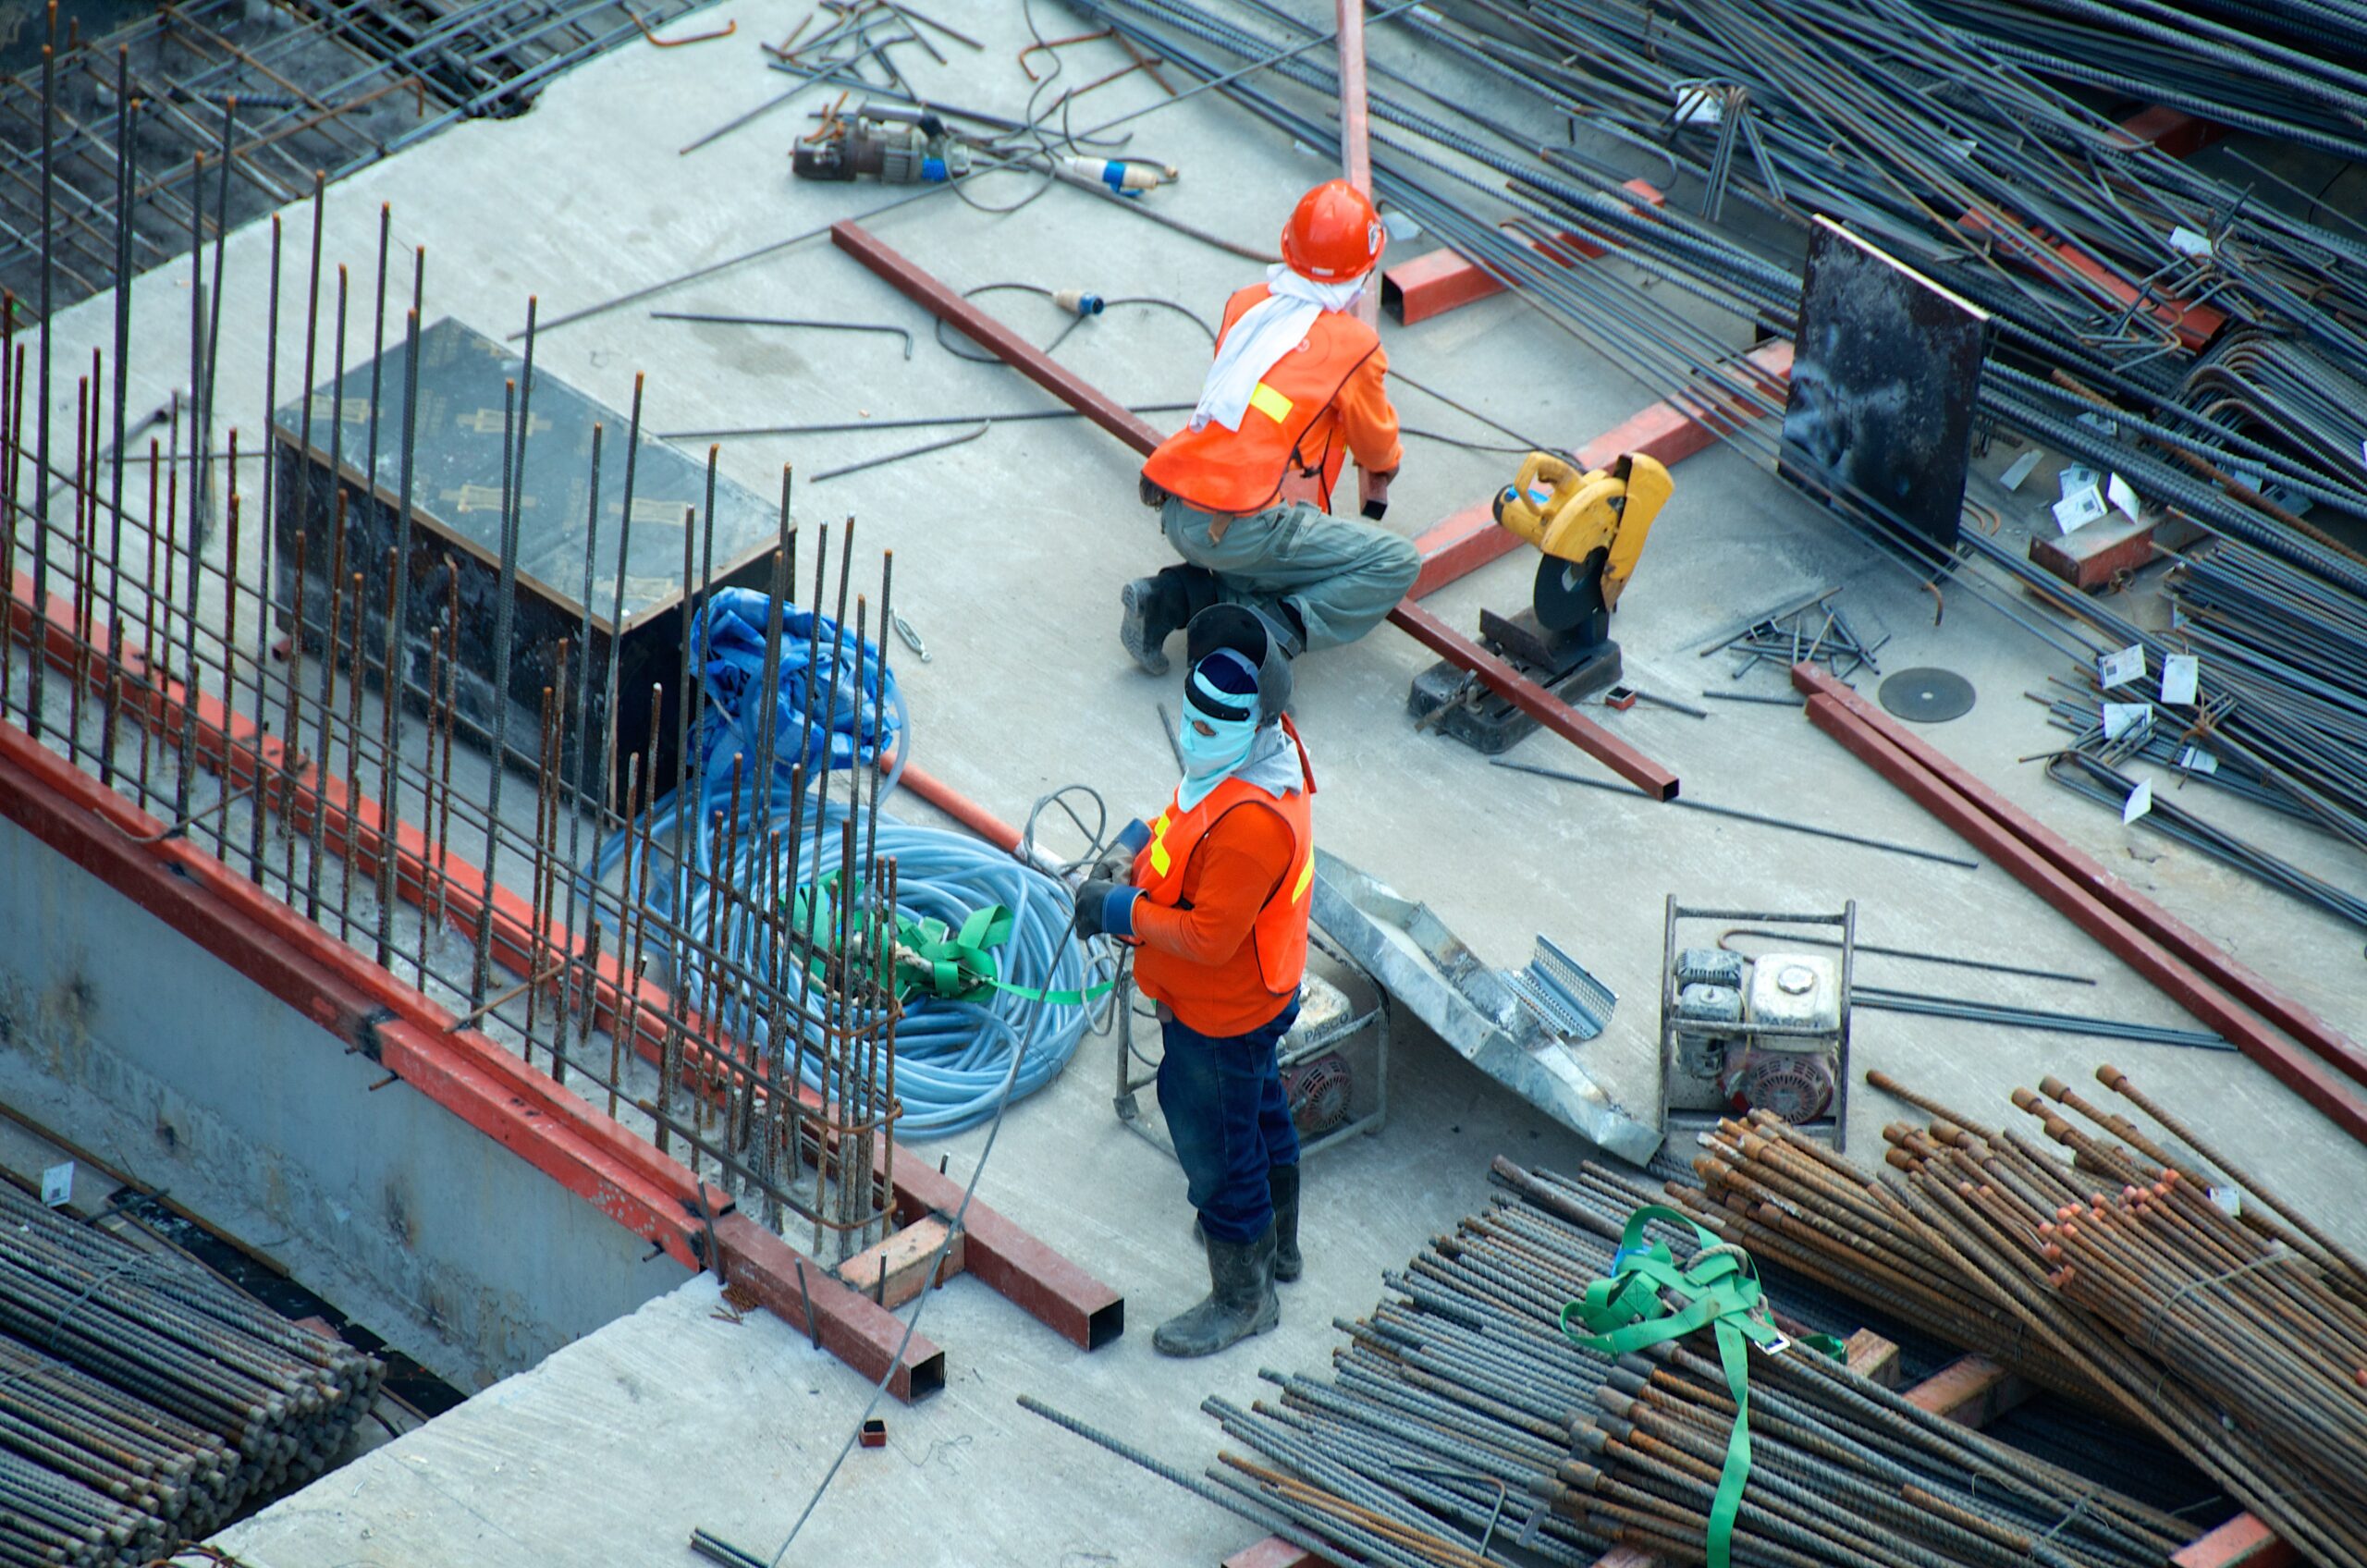 Construction worker standing on a concrete surface surrounded by metal poles and another construction worker